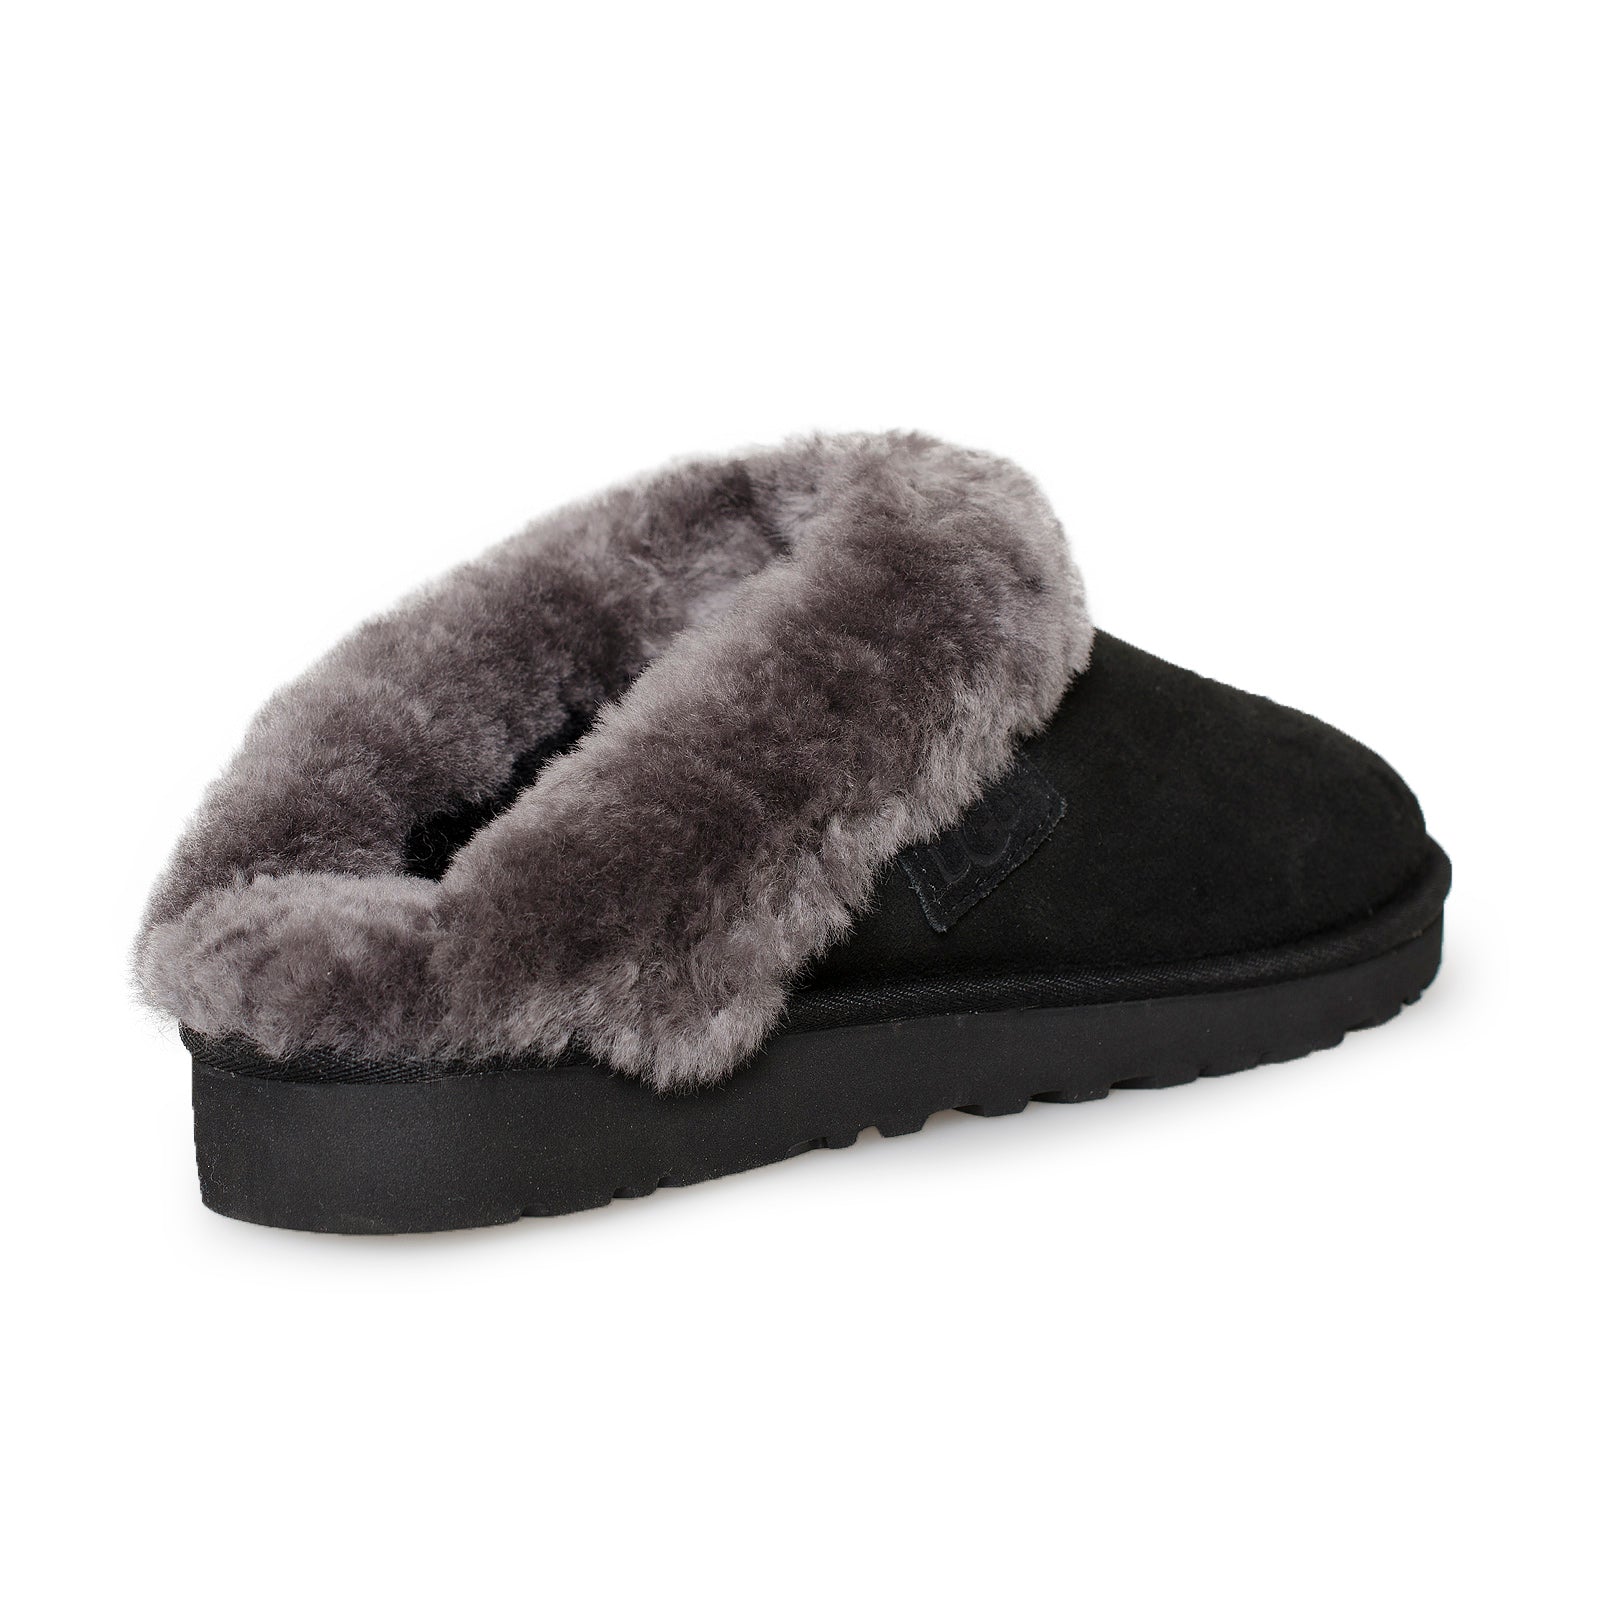 UGG Cluggette Black Slippers - Women's – MyCozyBoots